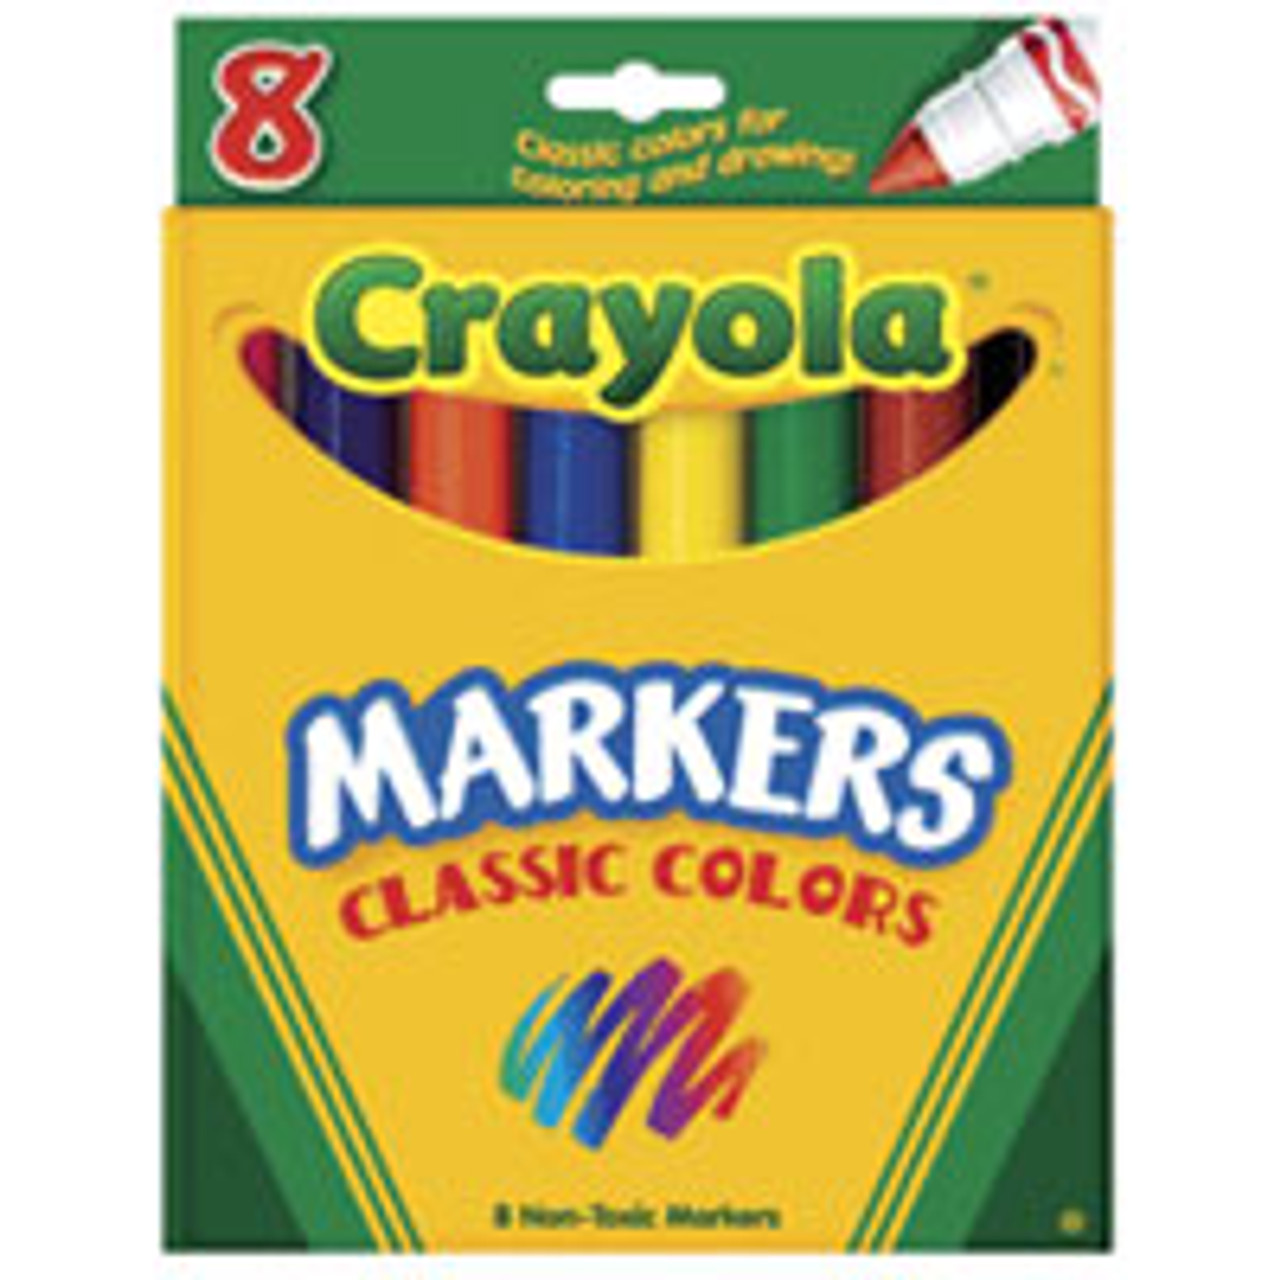 Crayola Broad Line Markers, Classic Colors - 8 Count 